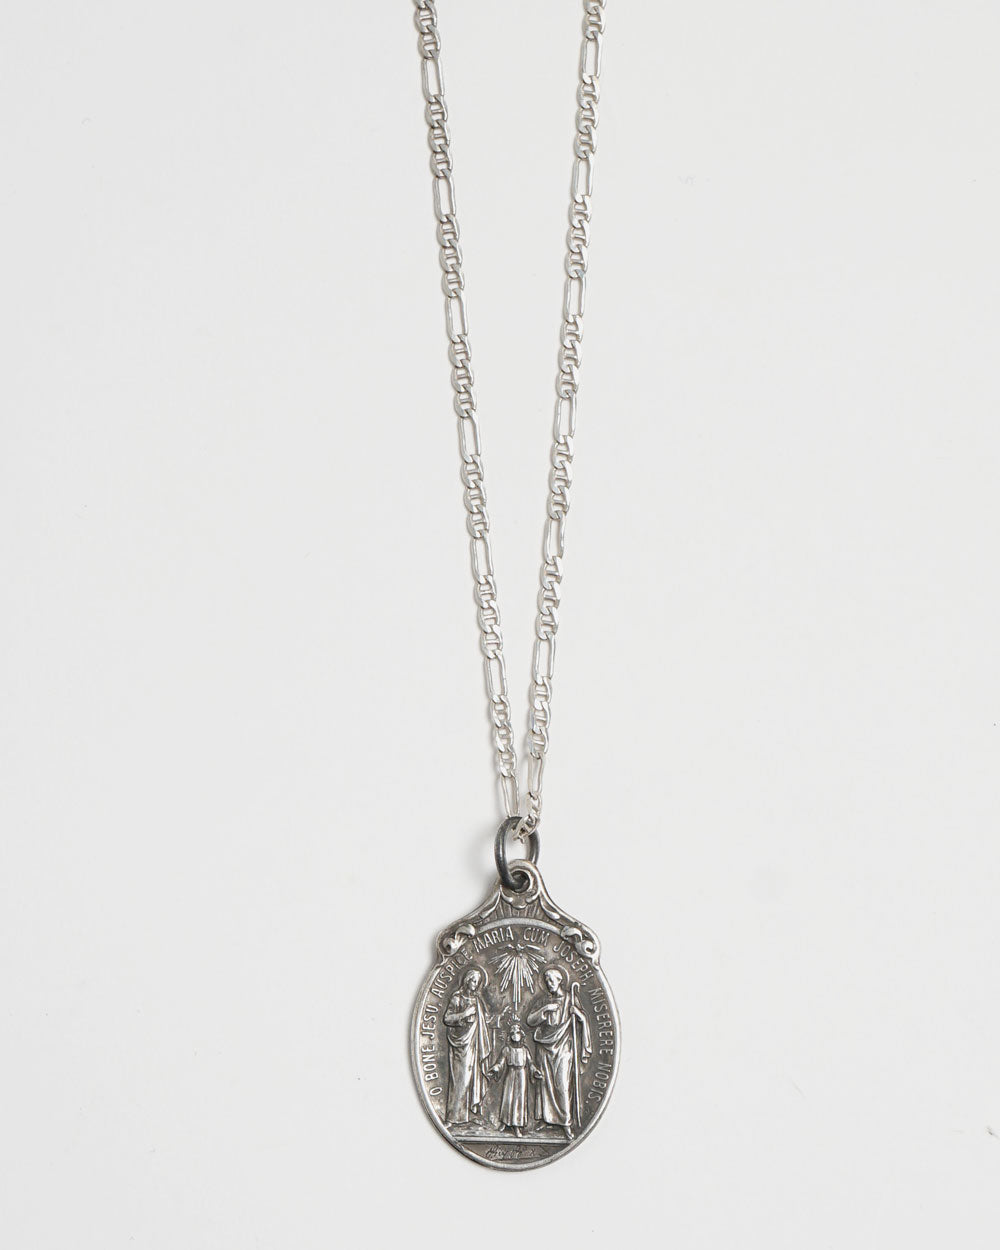 Silver Chain Necklace w/ Religious Charm